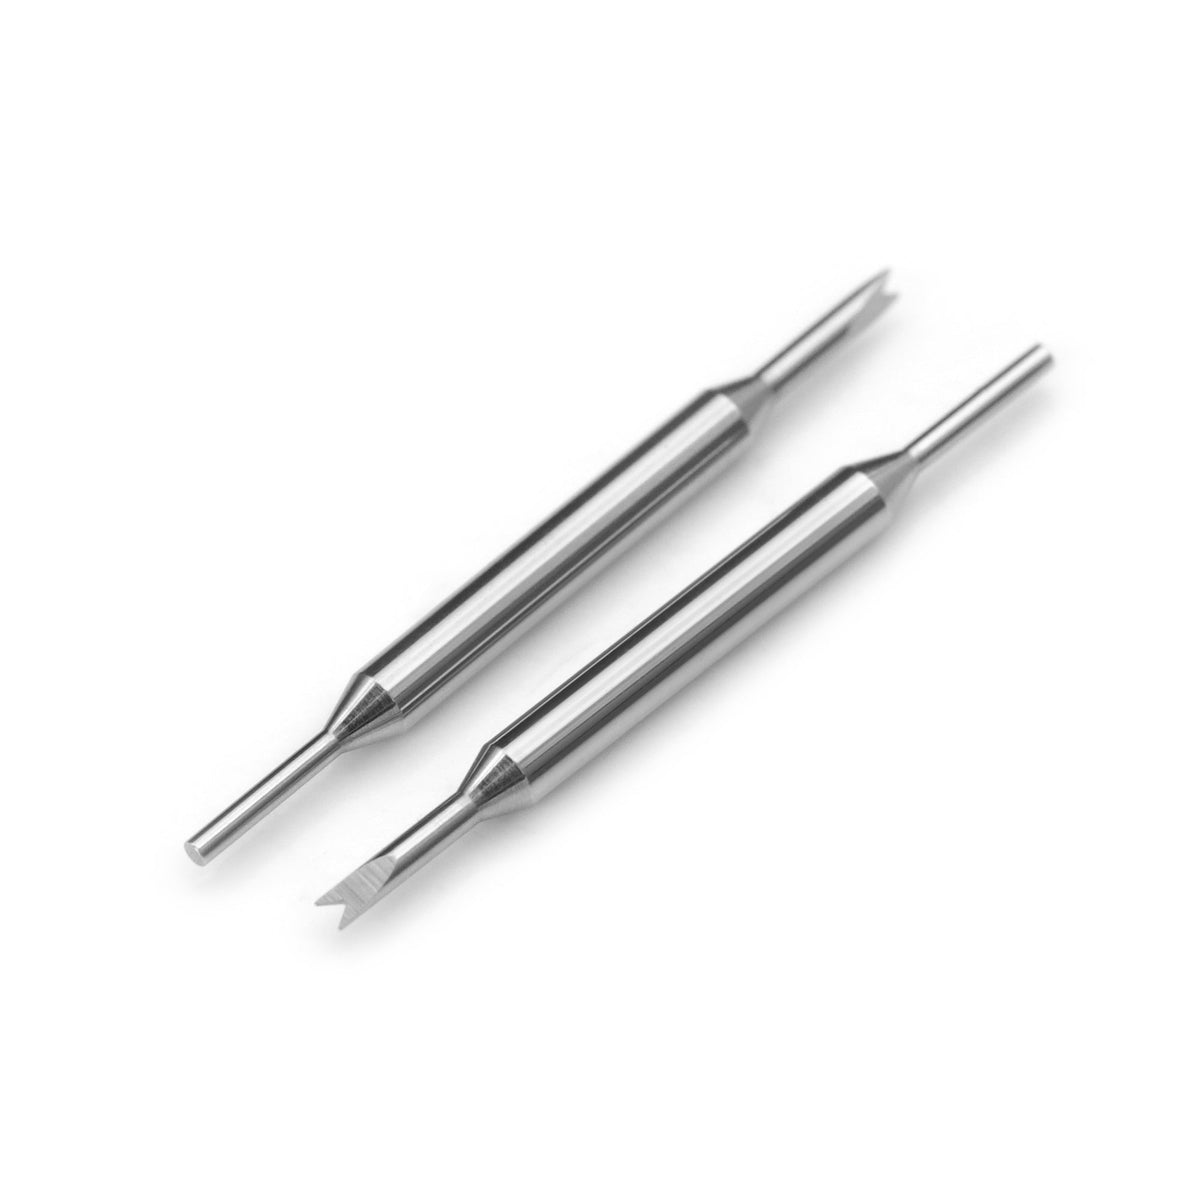 2 pcs of Reversible Pin and Fork Blades for Replacement of Compact Economy Spring Bar Tool Strapcode Watch Bands